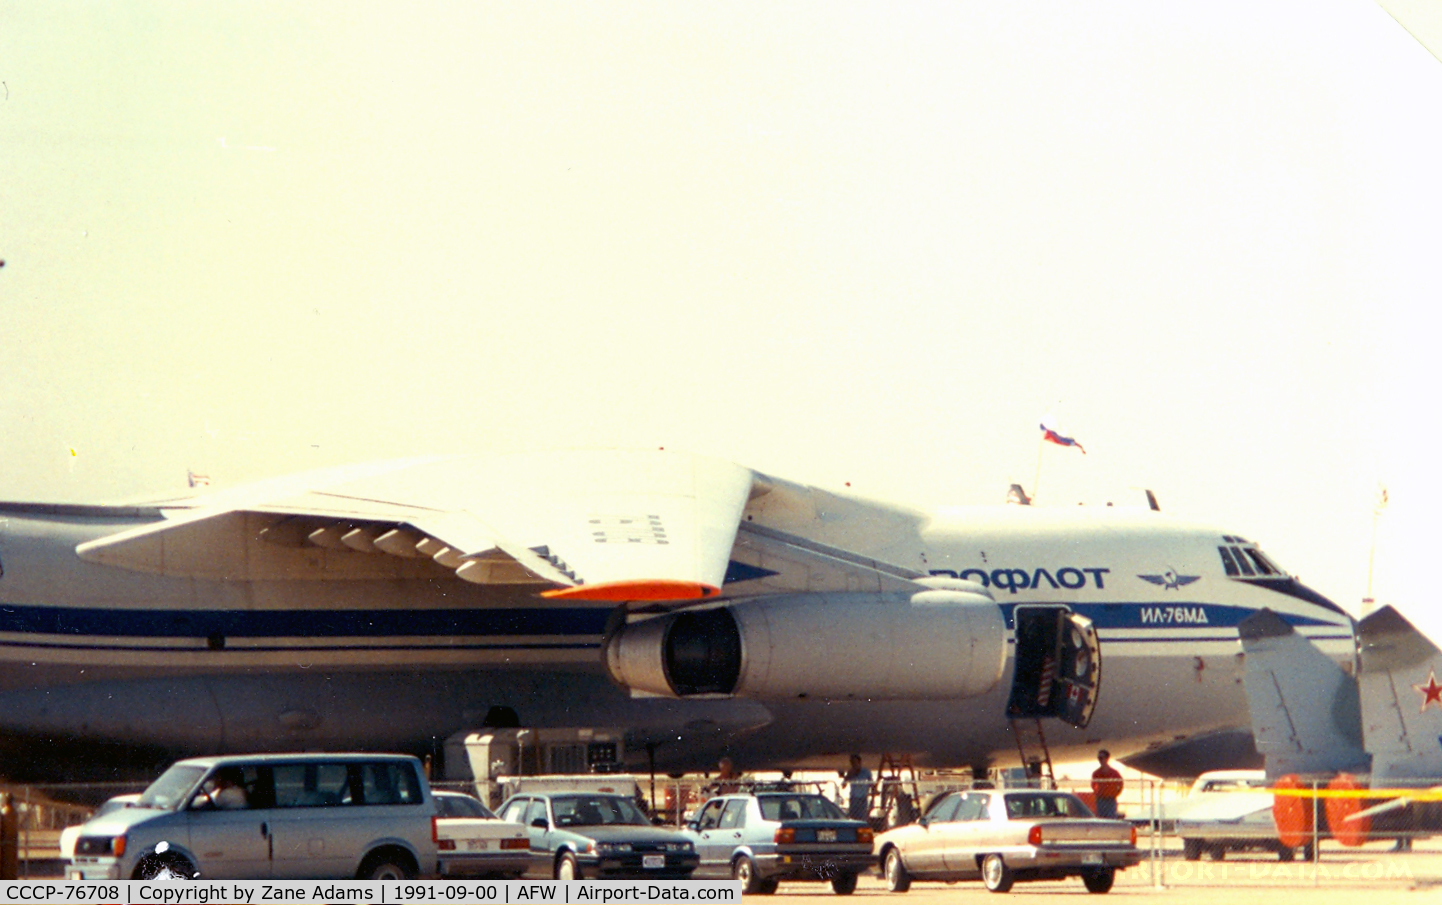 CCCP-76708, 1986 Ilyushin IL-76MD C/N 0063473171, Support for First Mig-29 airshow tour in US